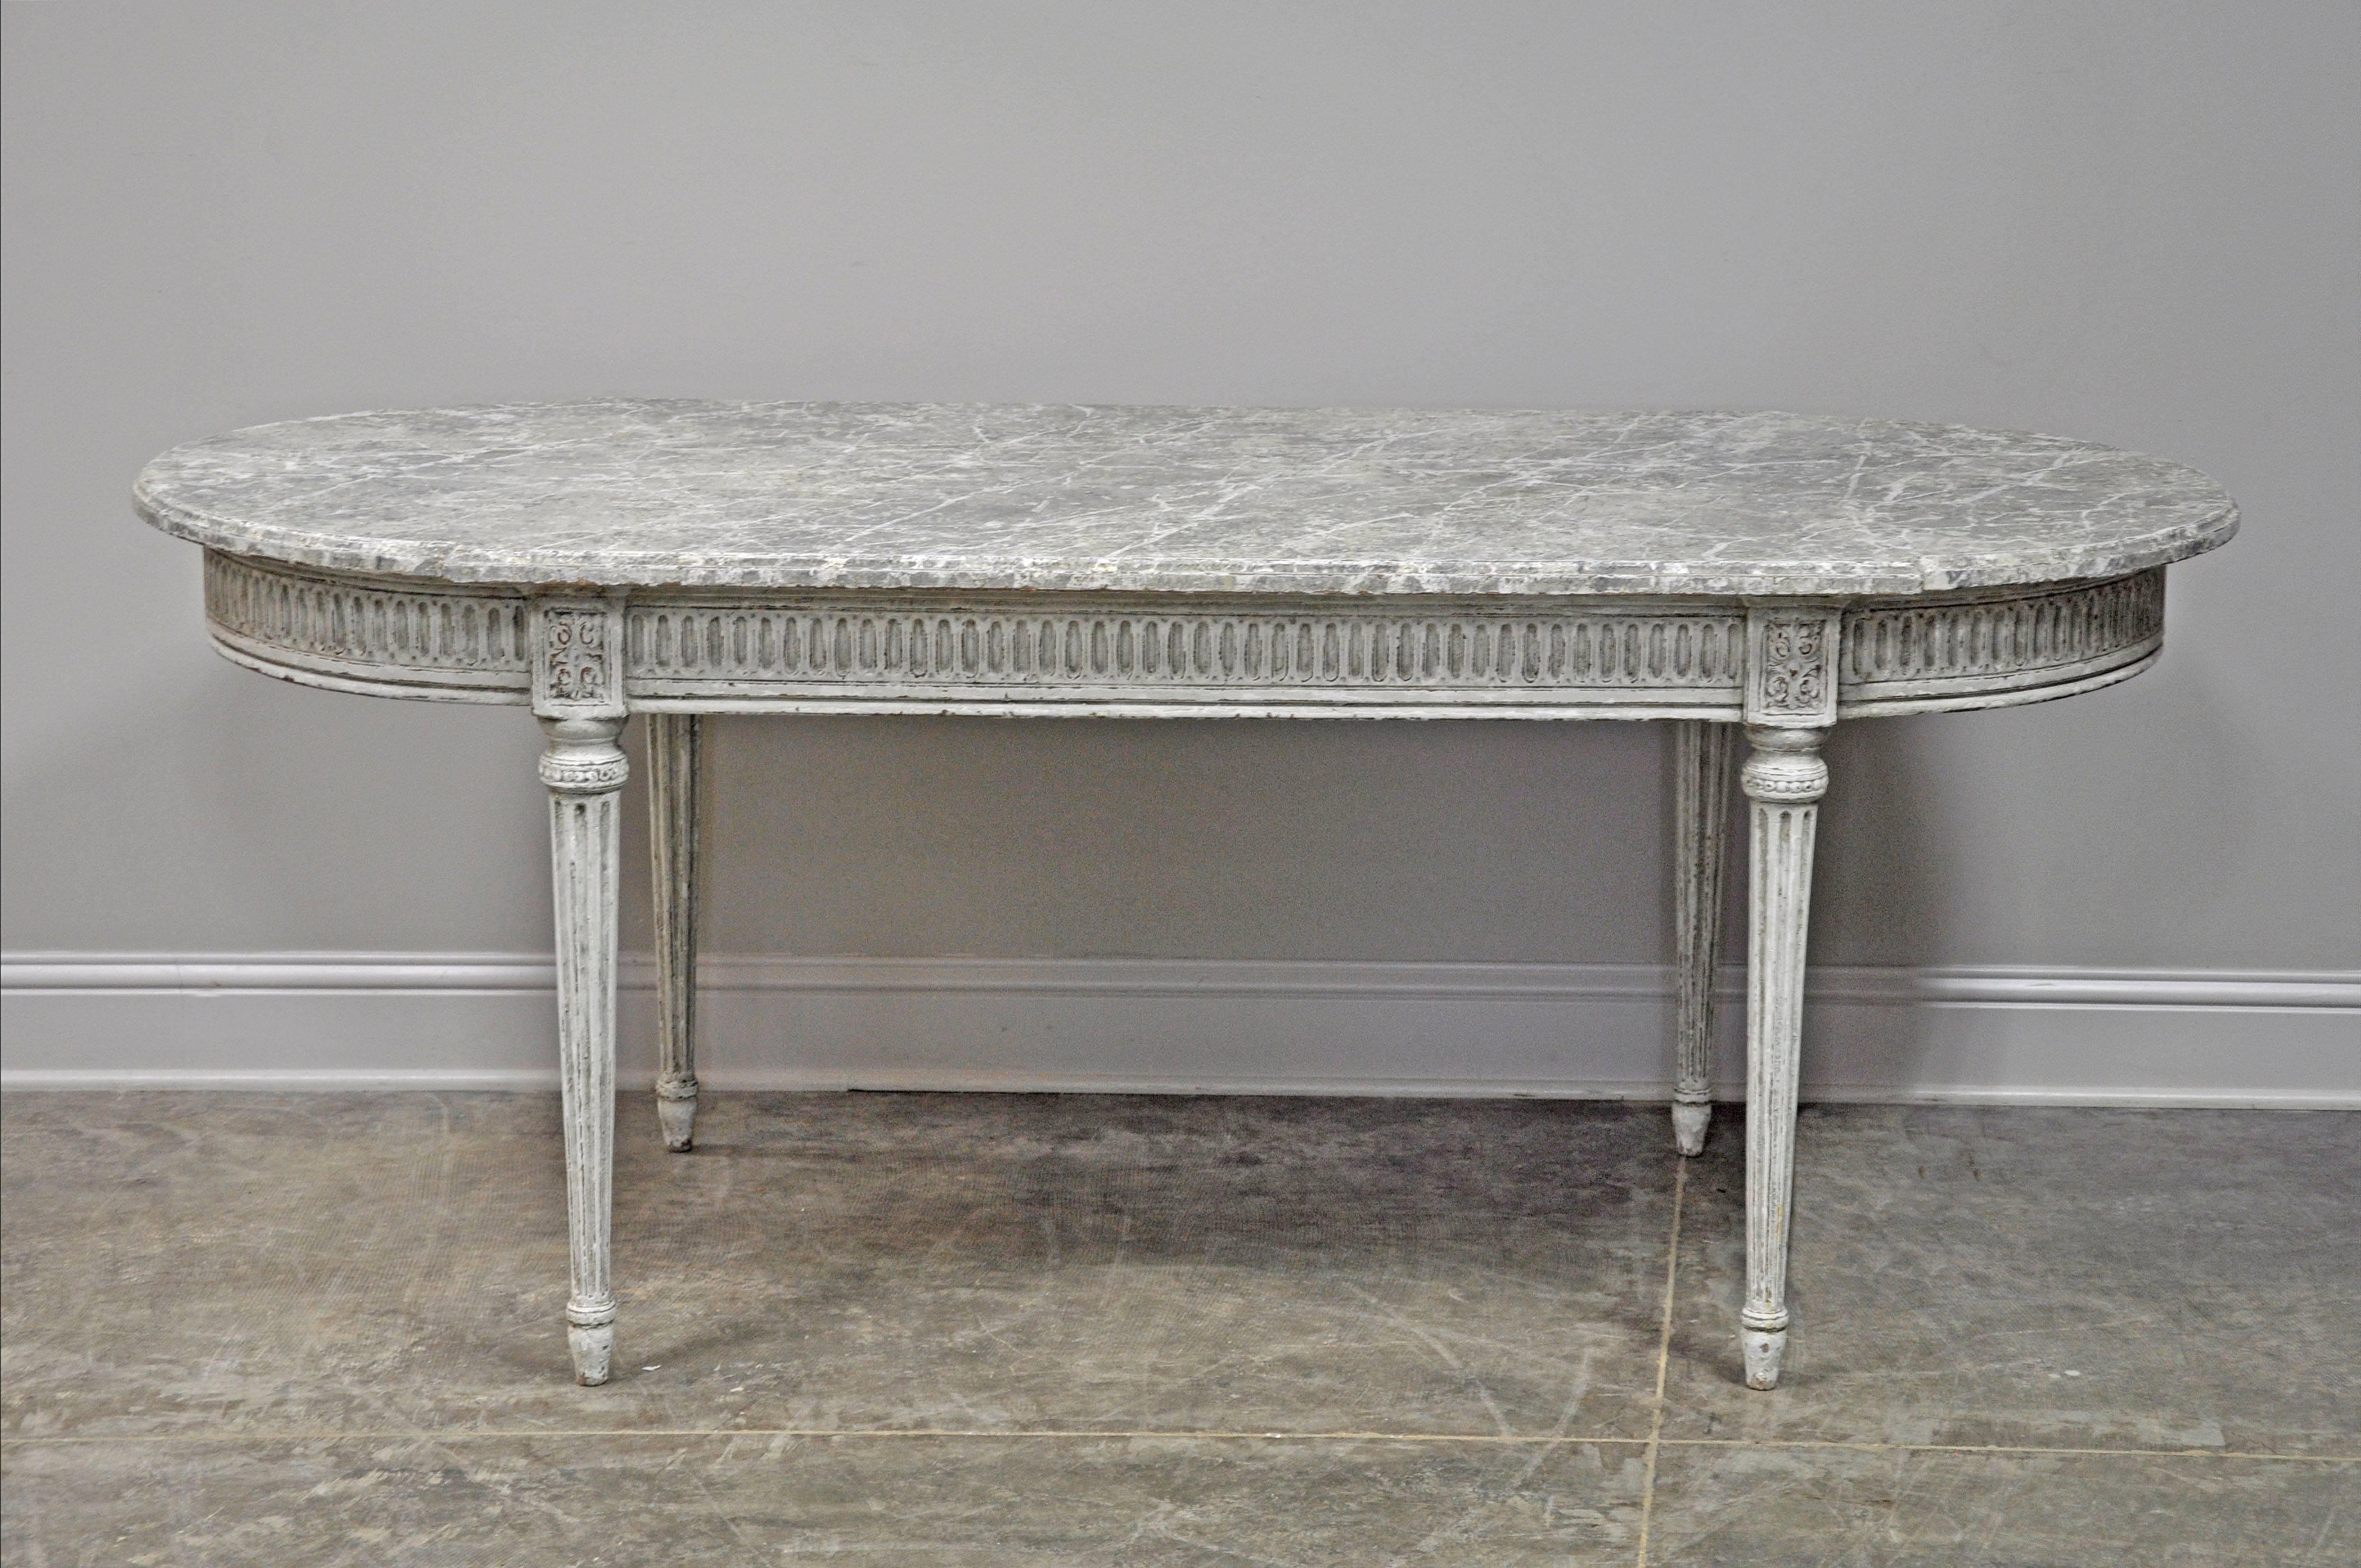 Painted French Louis XVI style Classic dining table with faux painted top and multi-layered, 'distressed' finish.

Established in 1979, Joyce Horn Antiques, ltd. continues its 36 year tradition of being a family owned and operated business